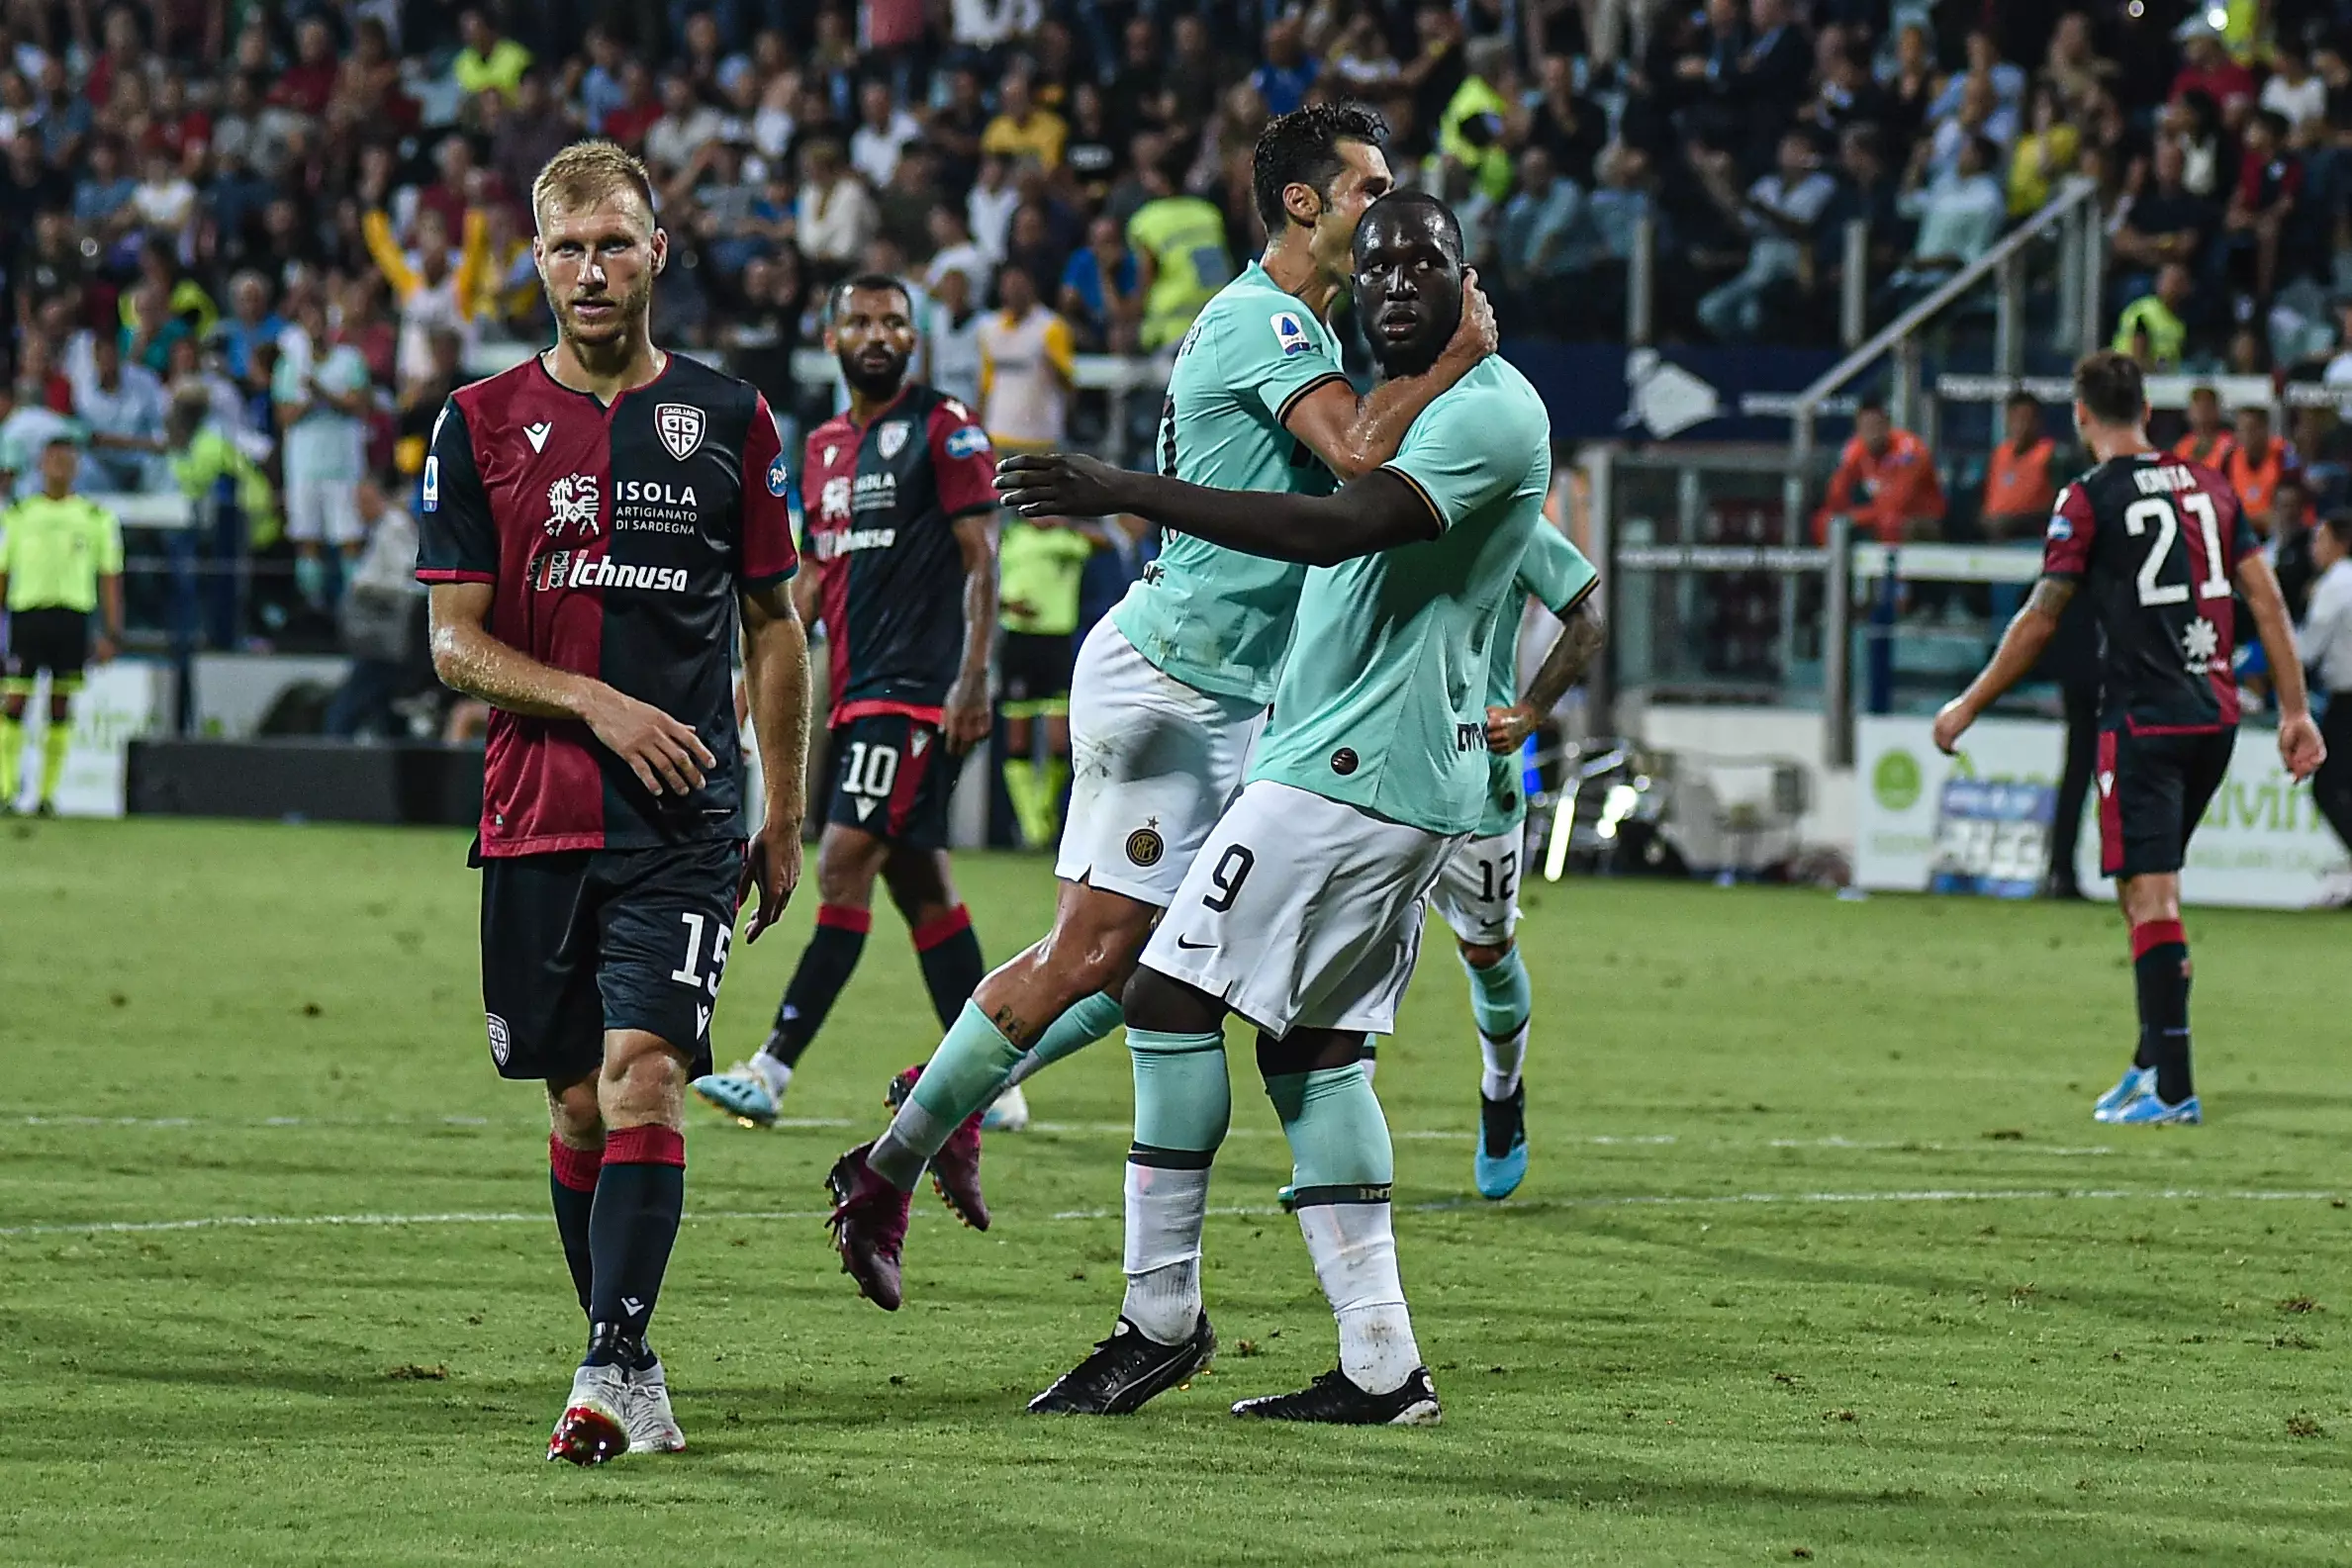 Lukaku was abused by Cagliari fans earlier this year. (Image